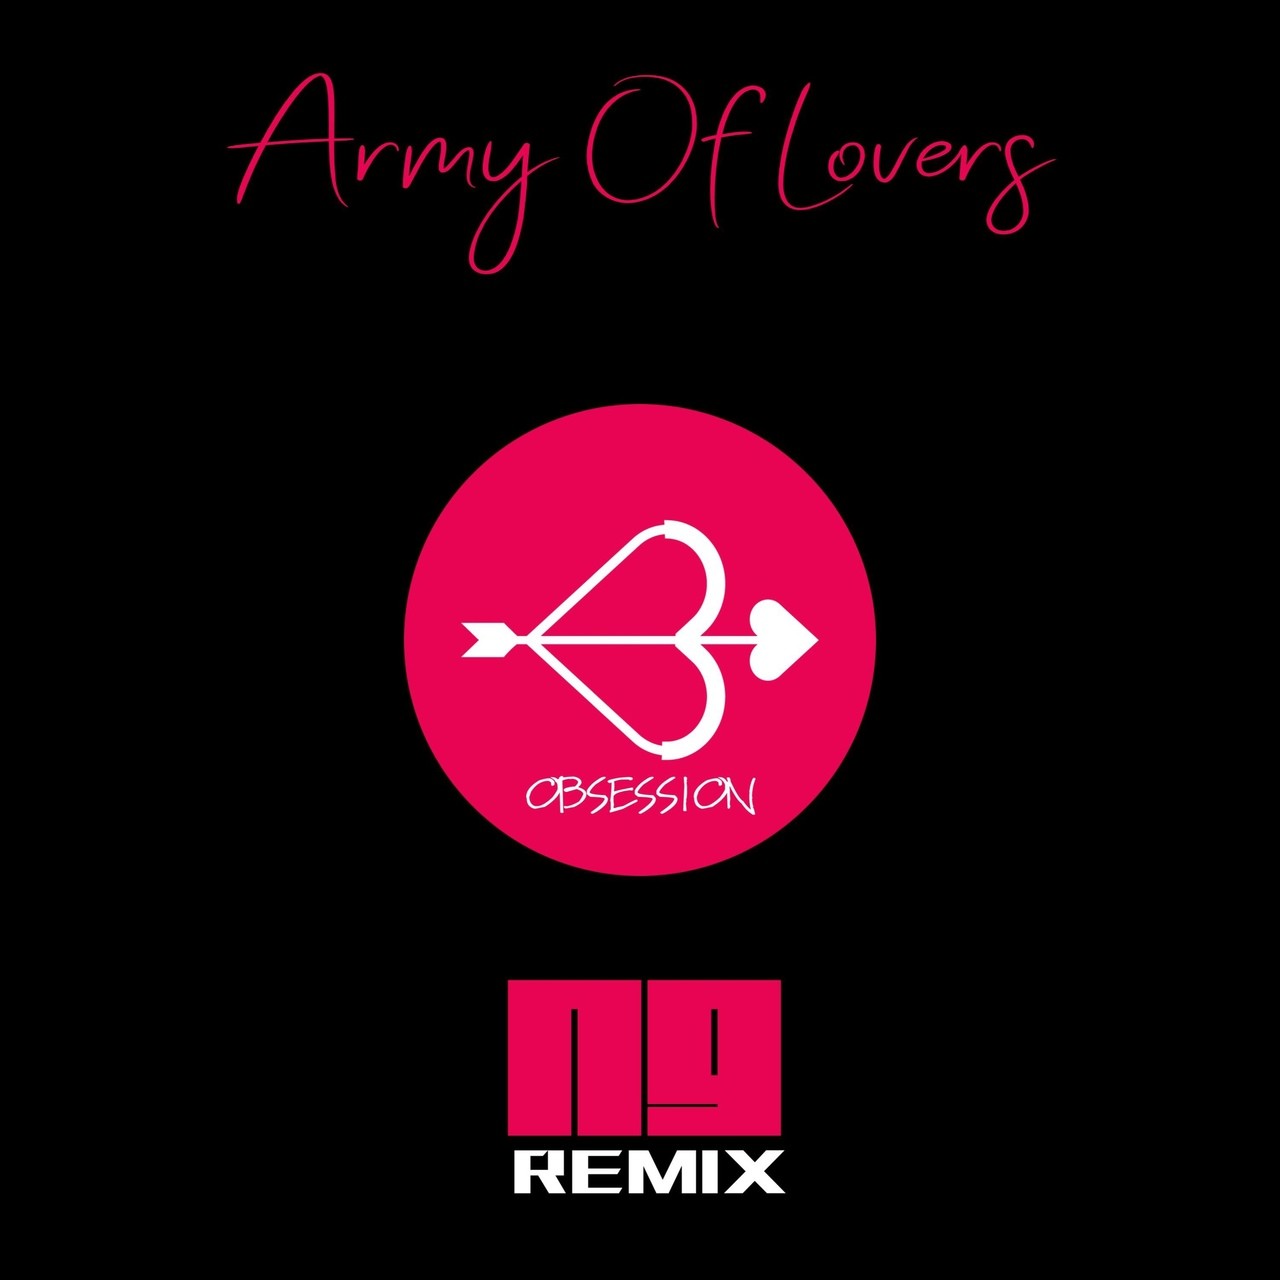 Obsession ng remix. Army of lovers Obsession.